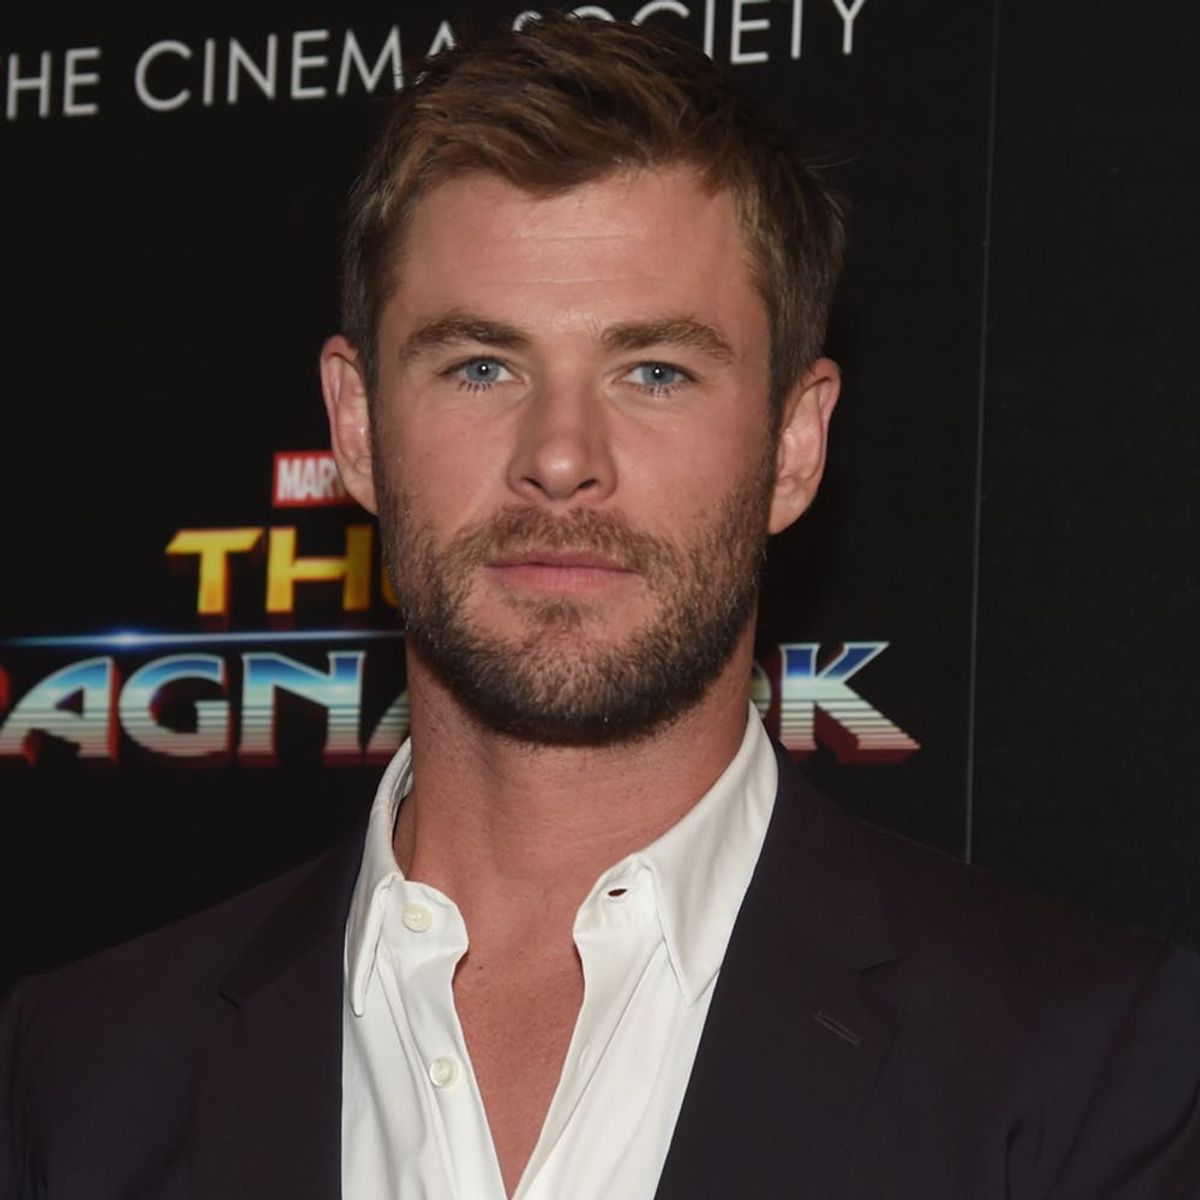 Chris Hemsworth Says He’s ‘Contractually’ Done With Thor After ‘Avengers 4’